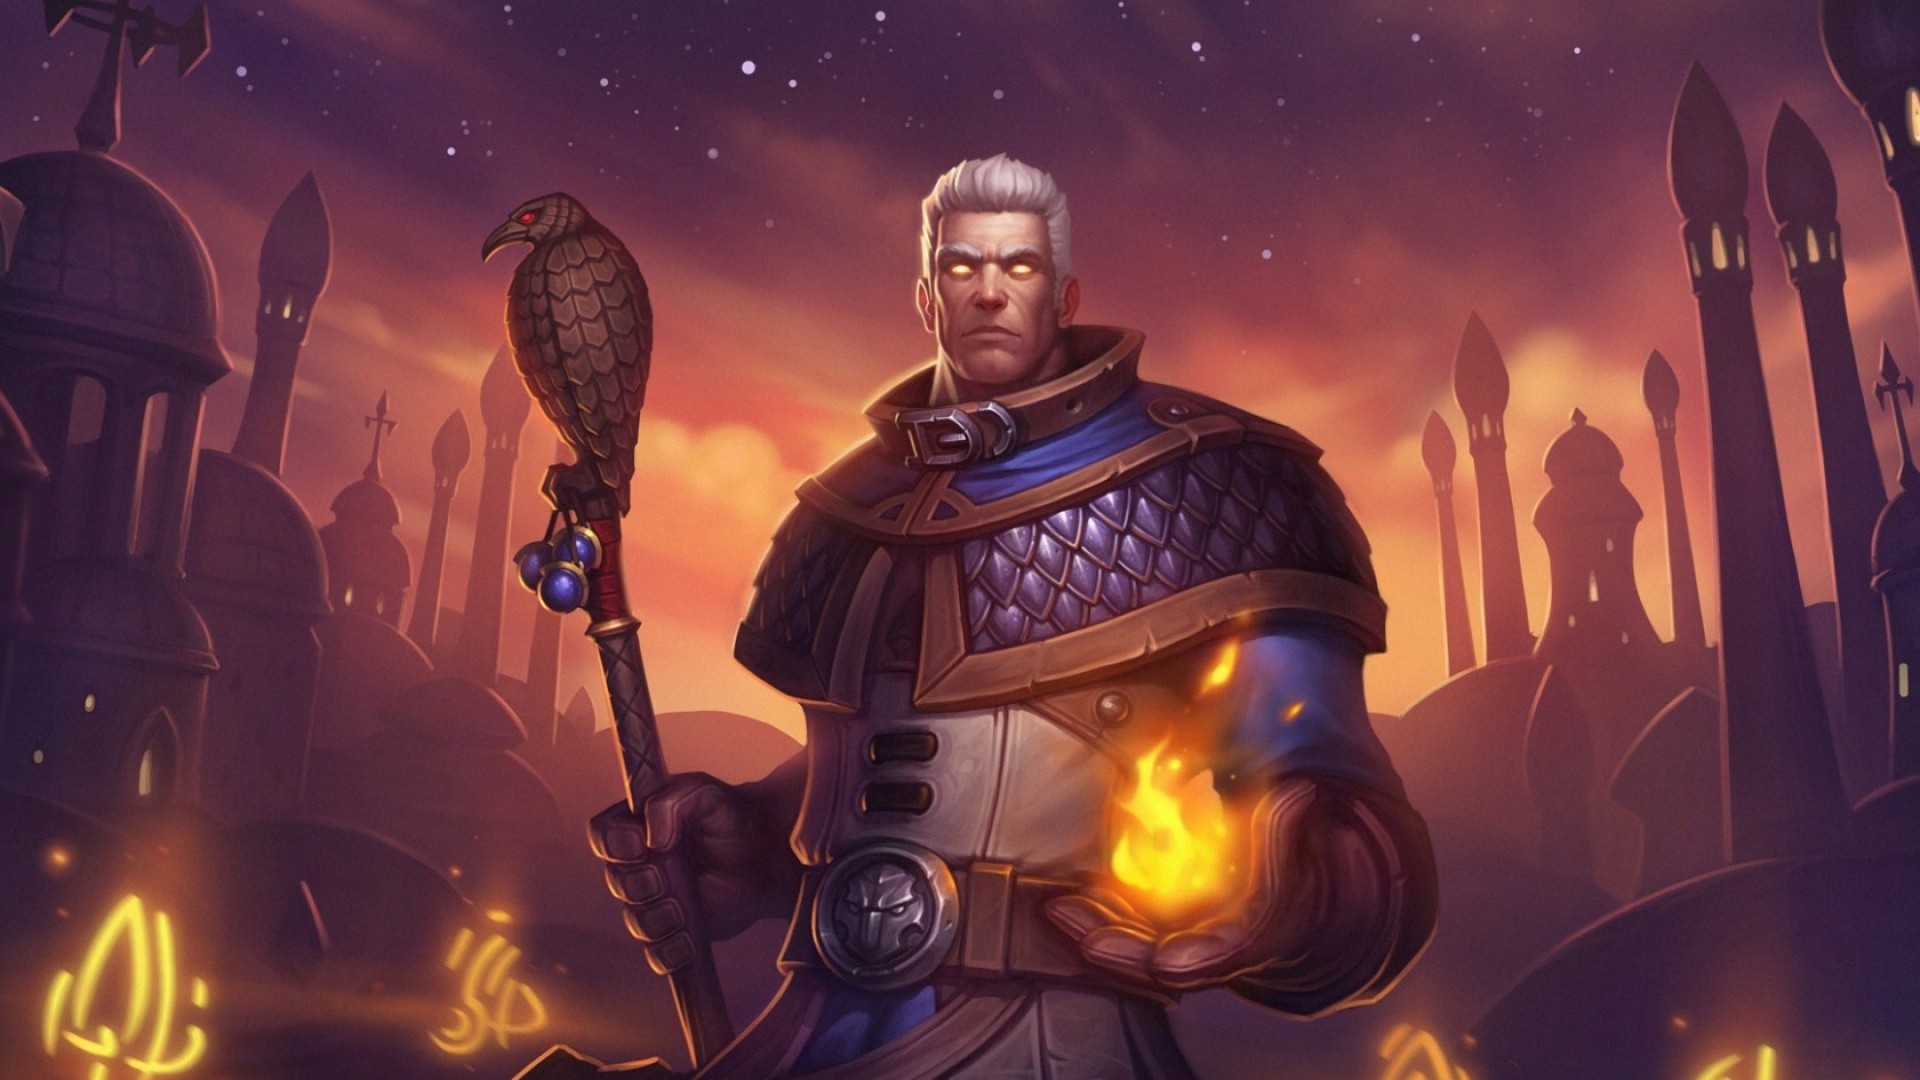 General 1920x1080 Hearthstone: Heroes of Warcraft video games staff fire magician Blizzard Entertainment